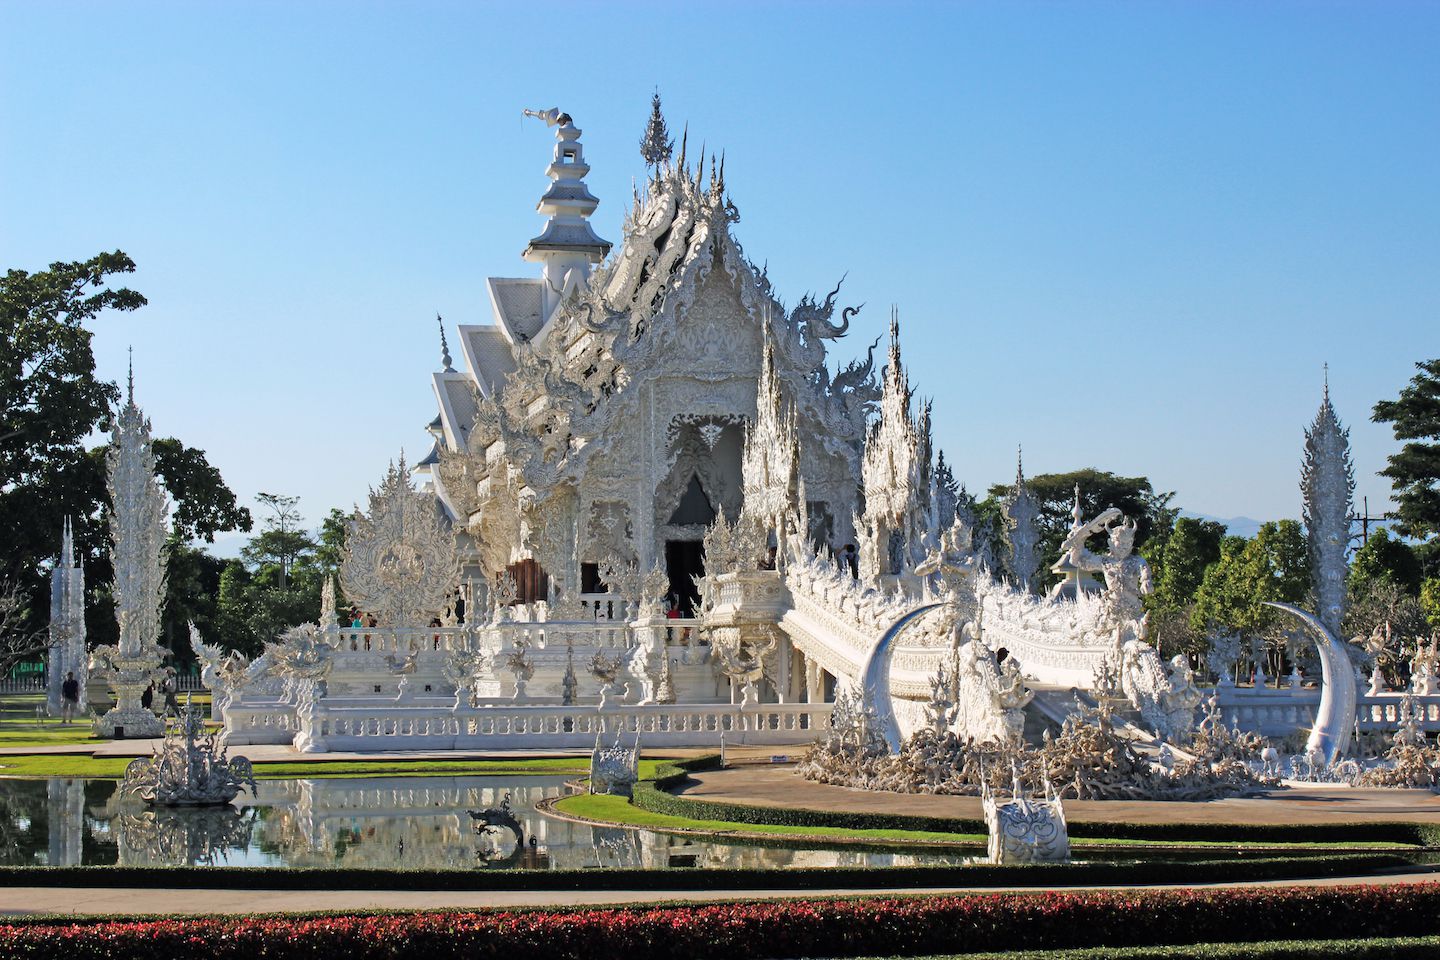 Leaving the White Temple in Chiang Rai